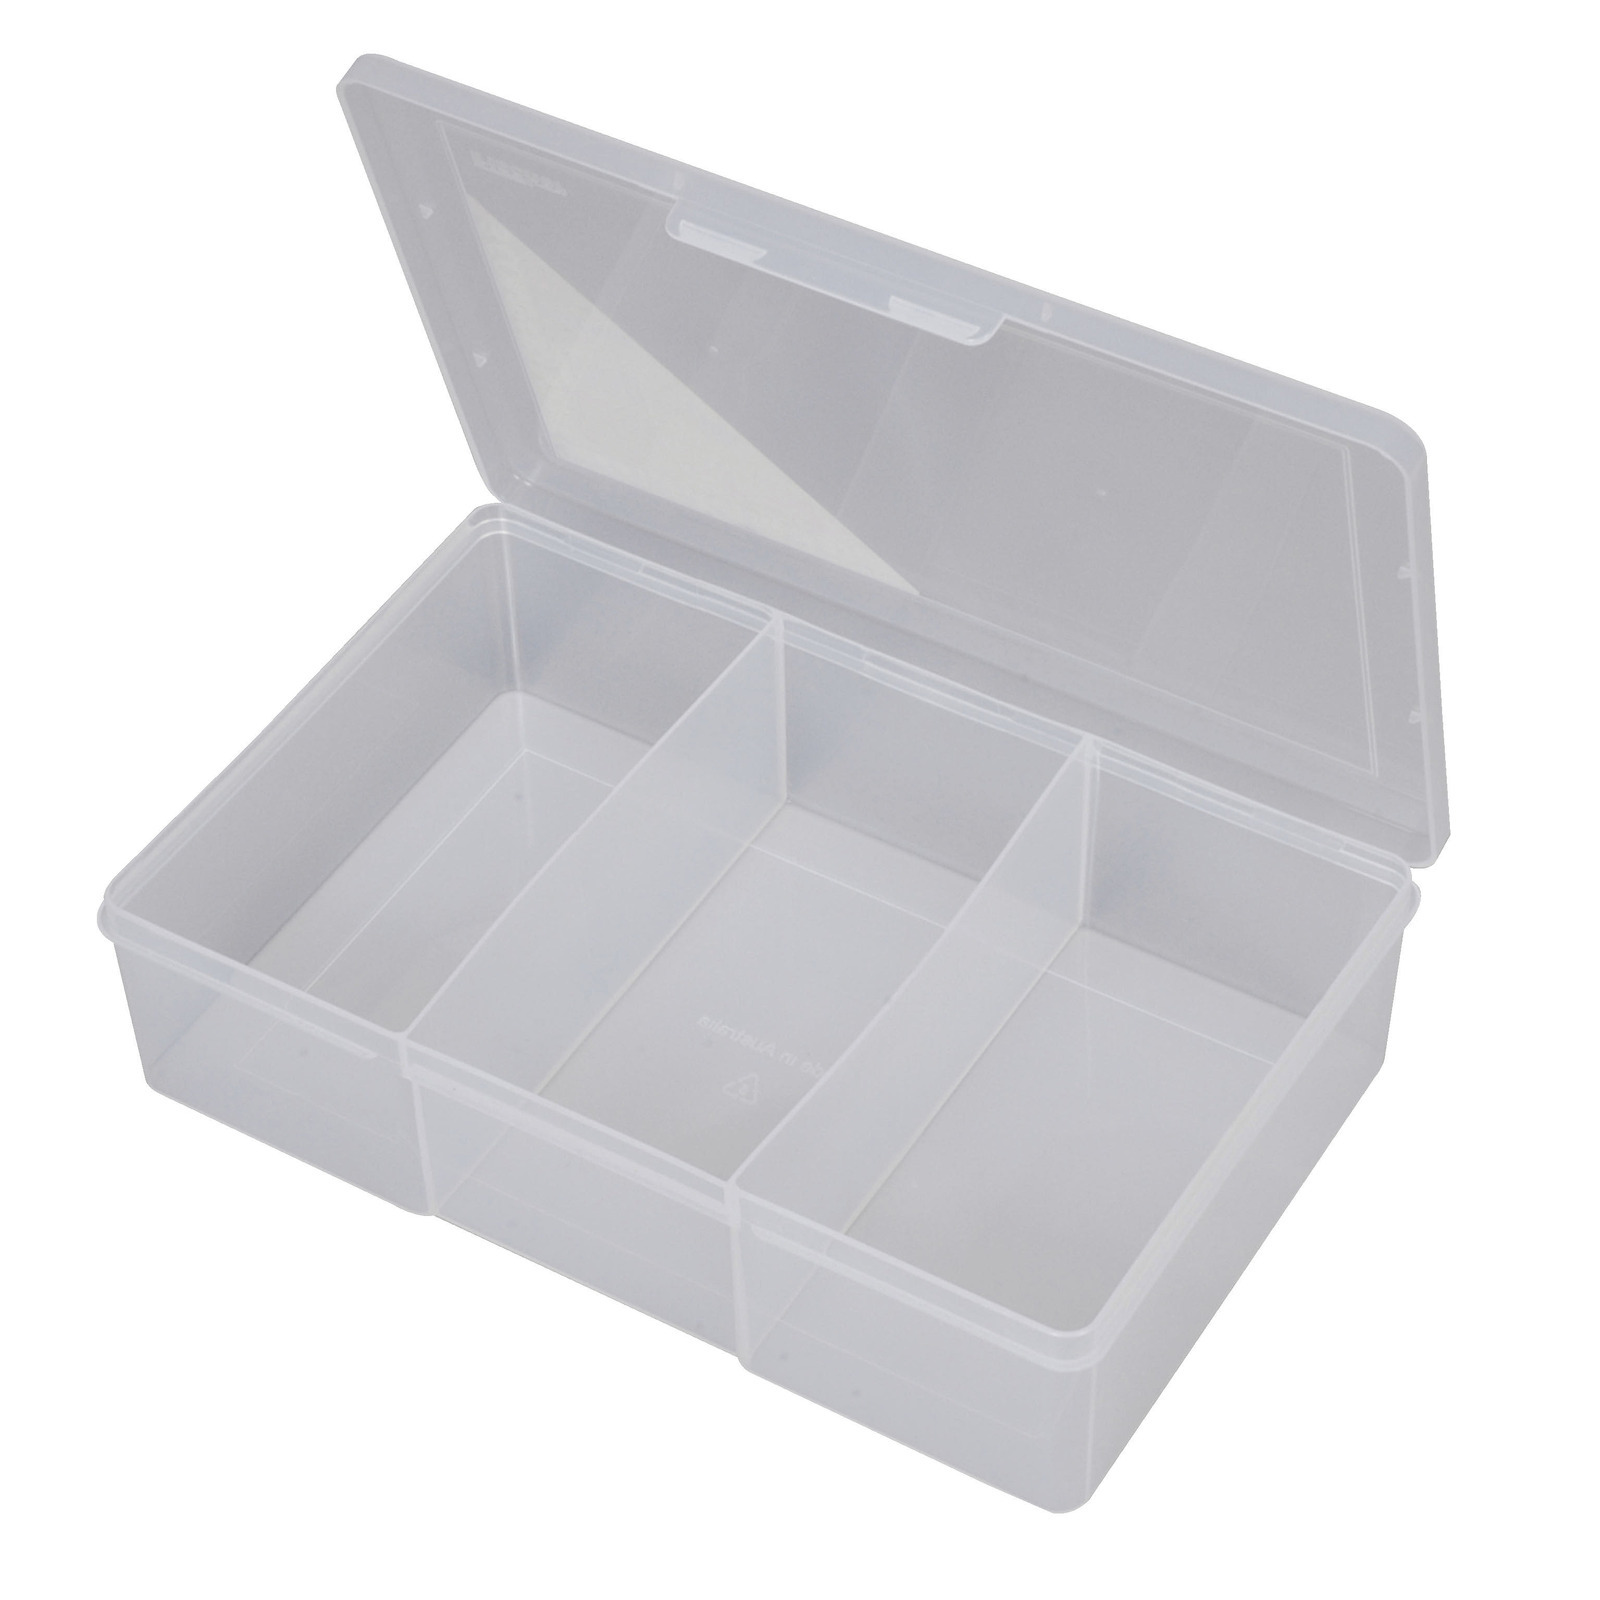 Accessory Boxes Large - Deep (3 compartment)